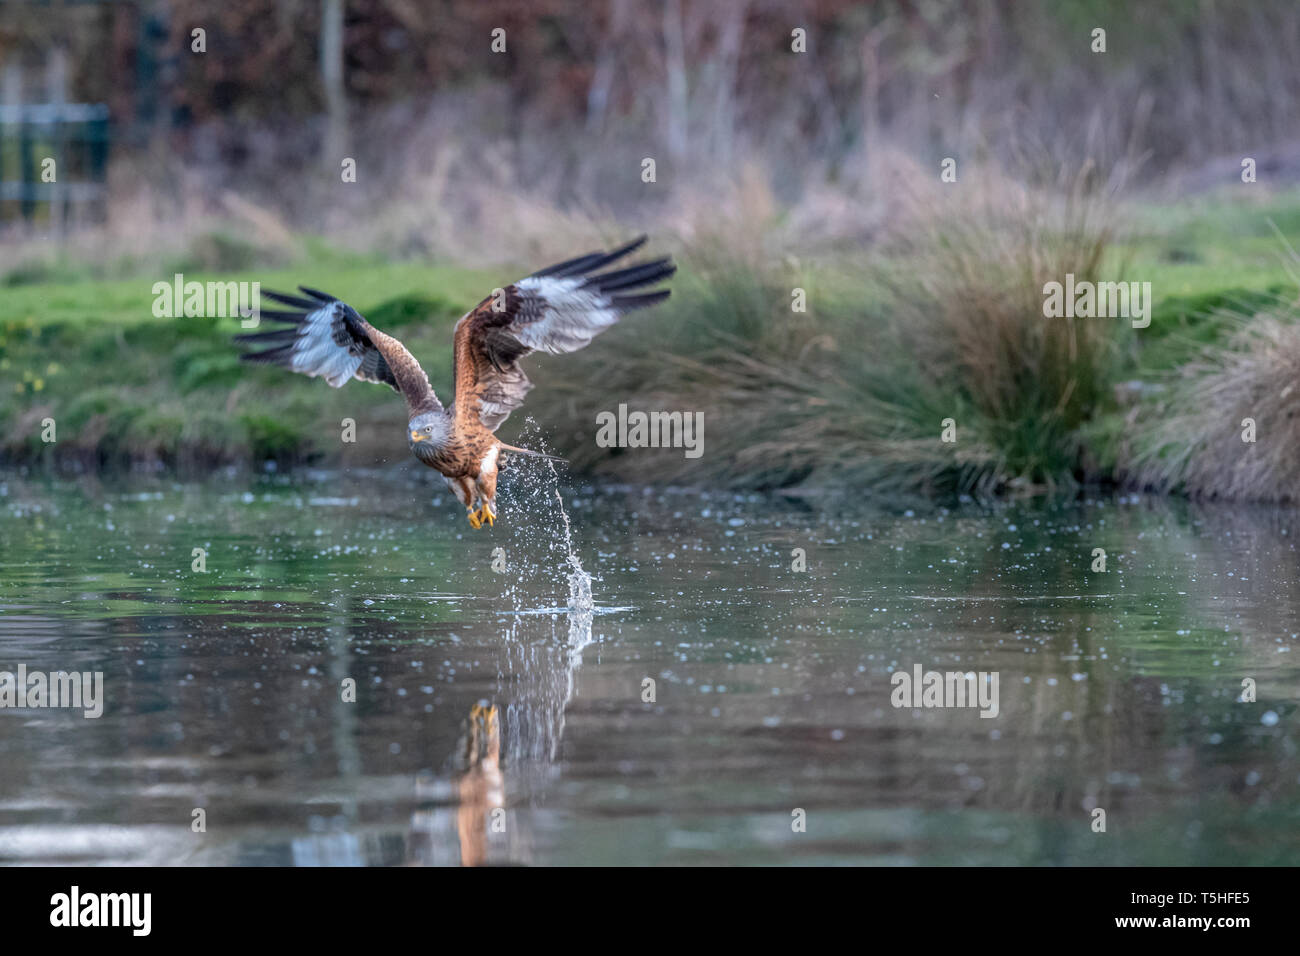 Red kite (Milvus milvus) taking a trout from a lake in Rutland, UK Stock Photo